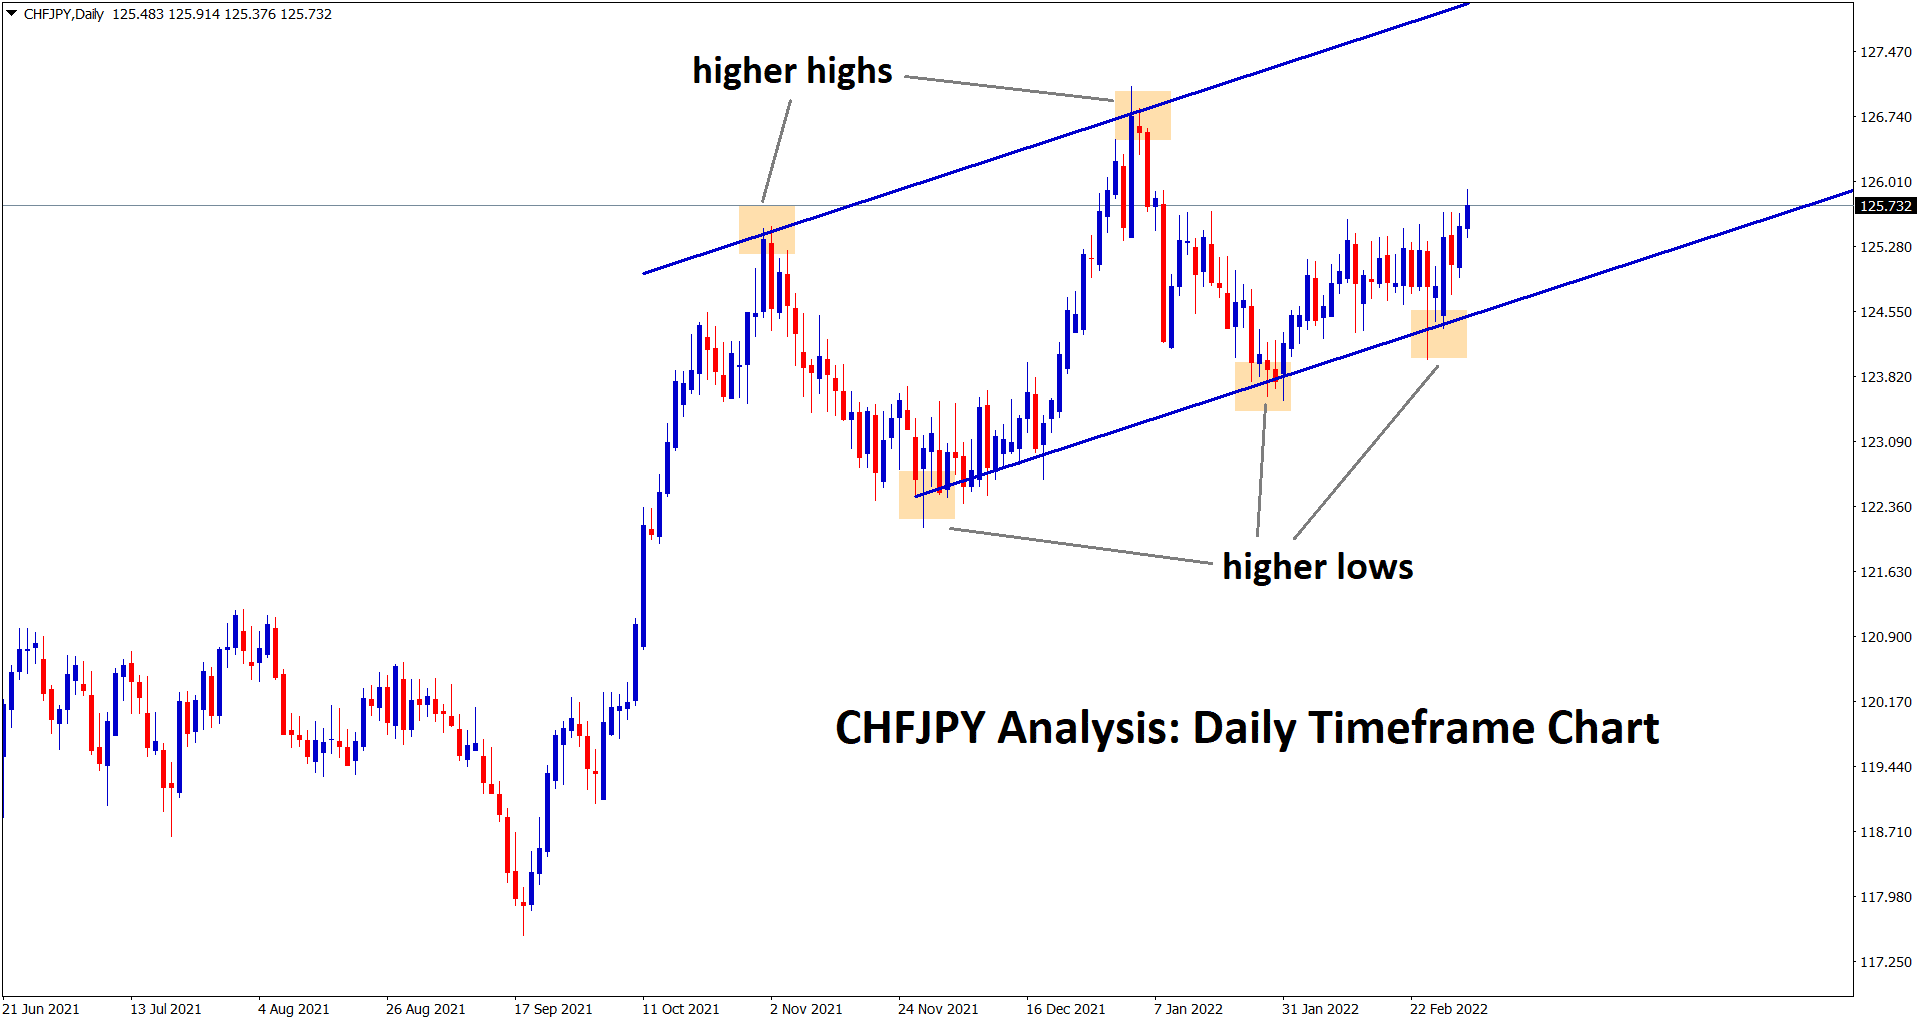 chfjpy is rebounding from the higher low area